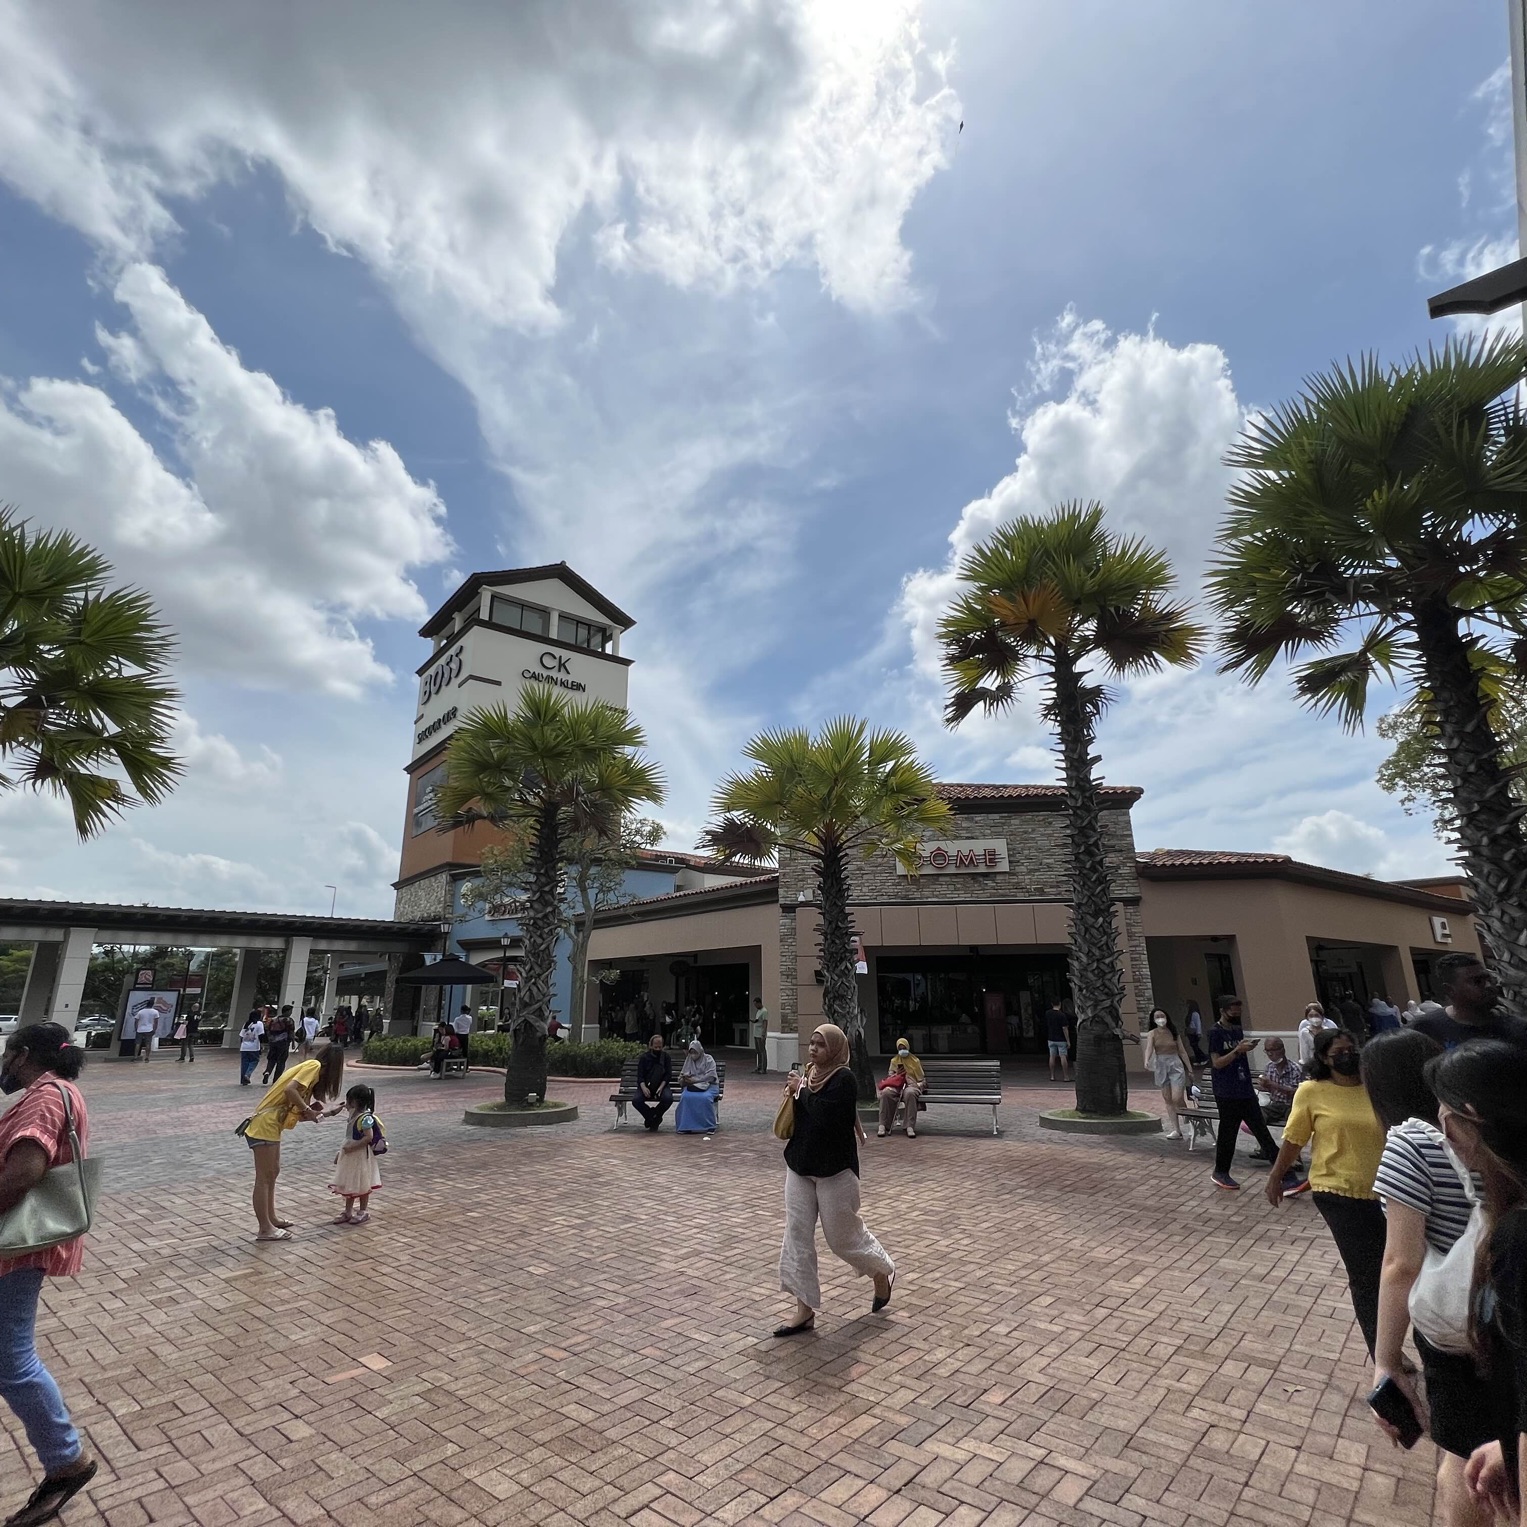 5 Reasons To Visit The Upgraded Version Of Johor Premium Outlets